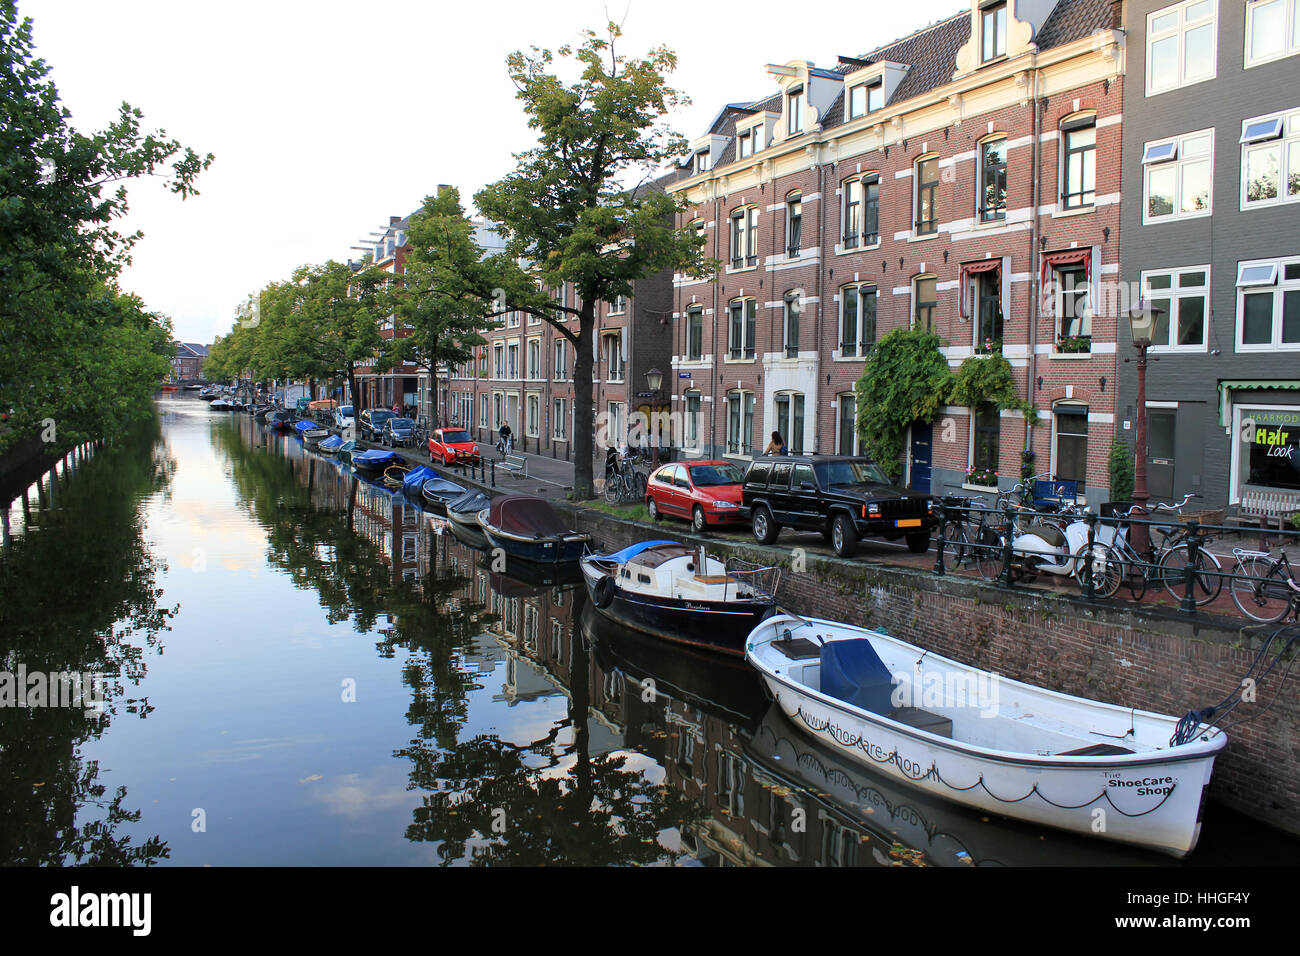 amsterdam canal houses Stock Photo